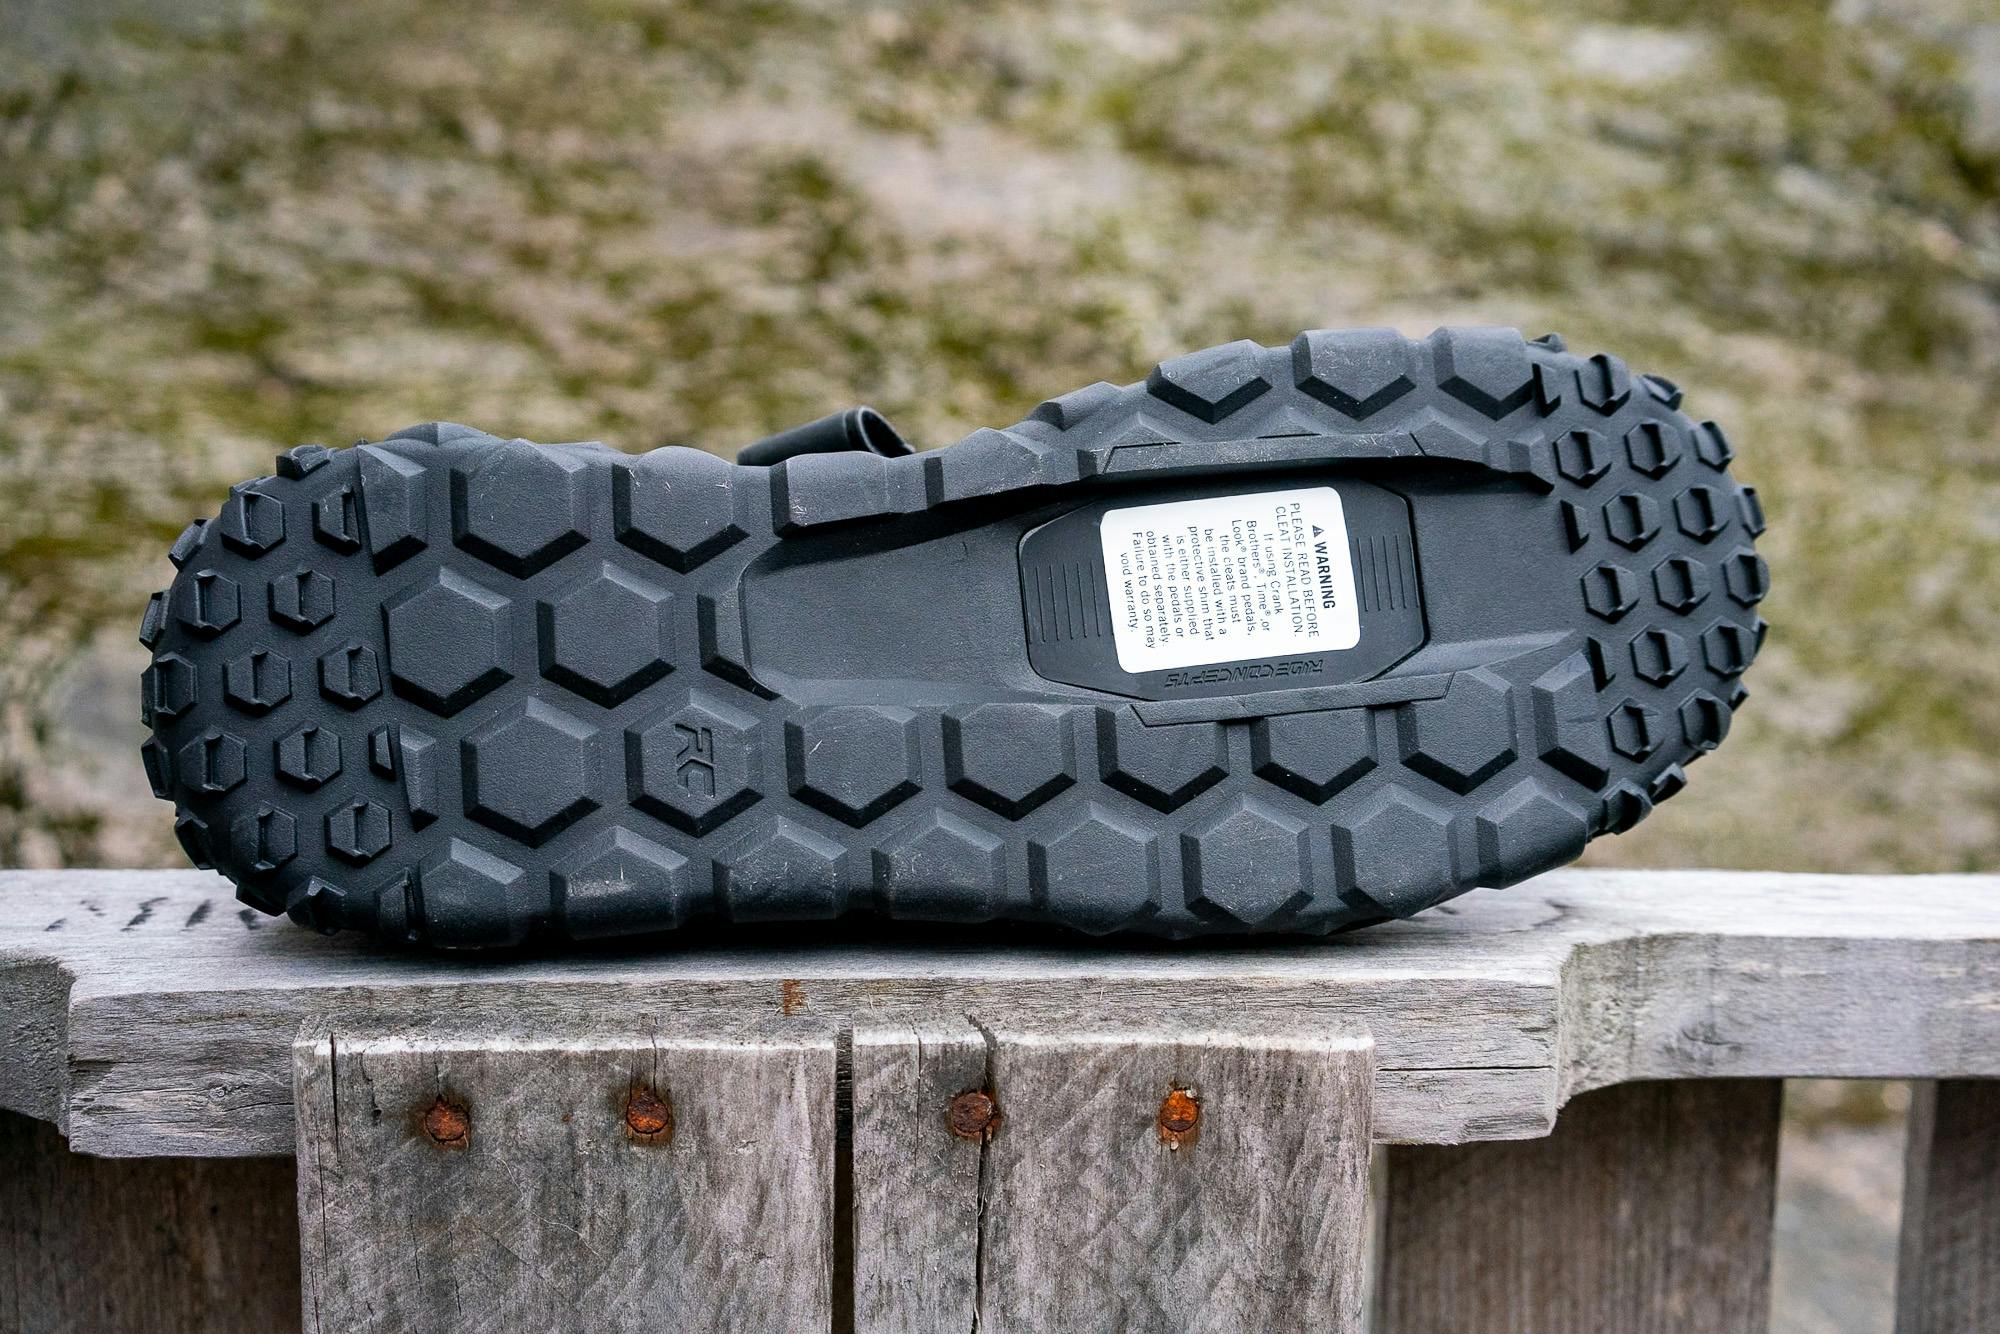 Clipless sole without cleats.